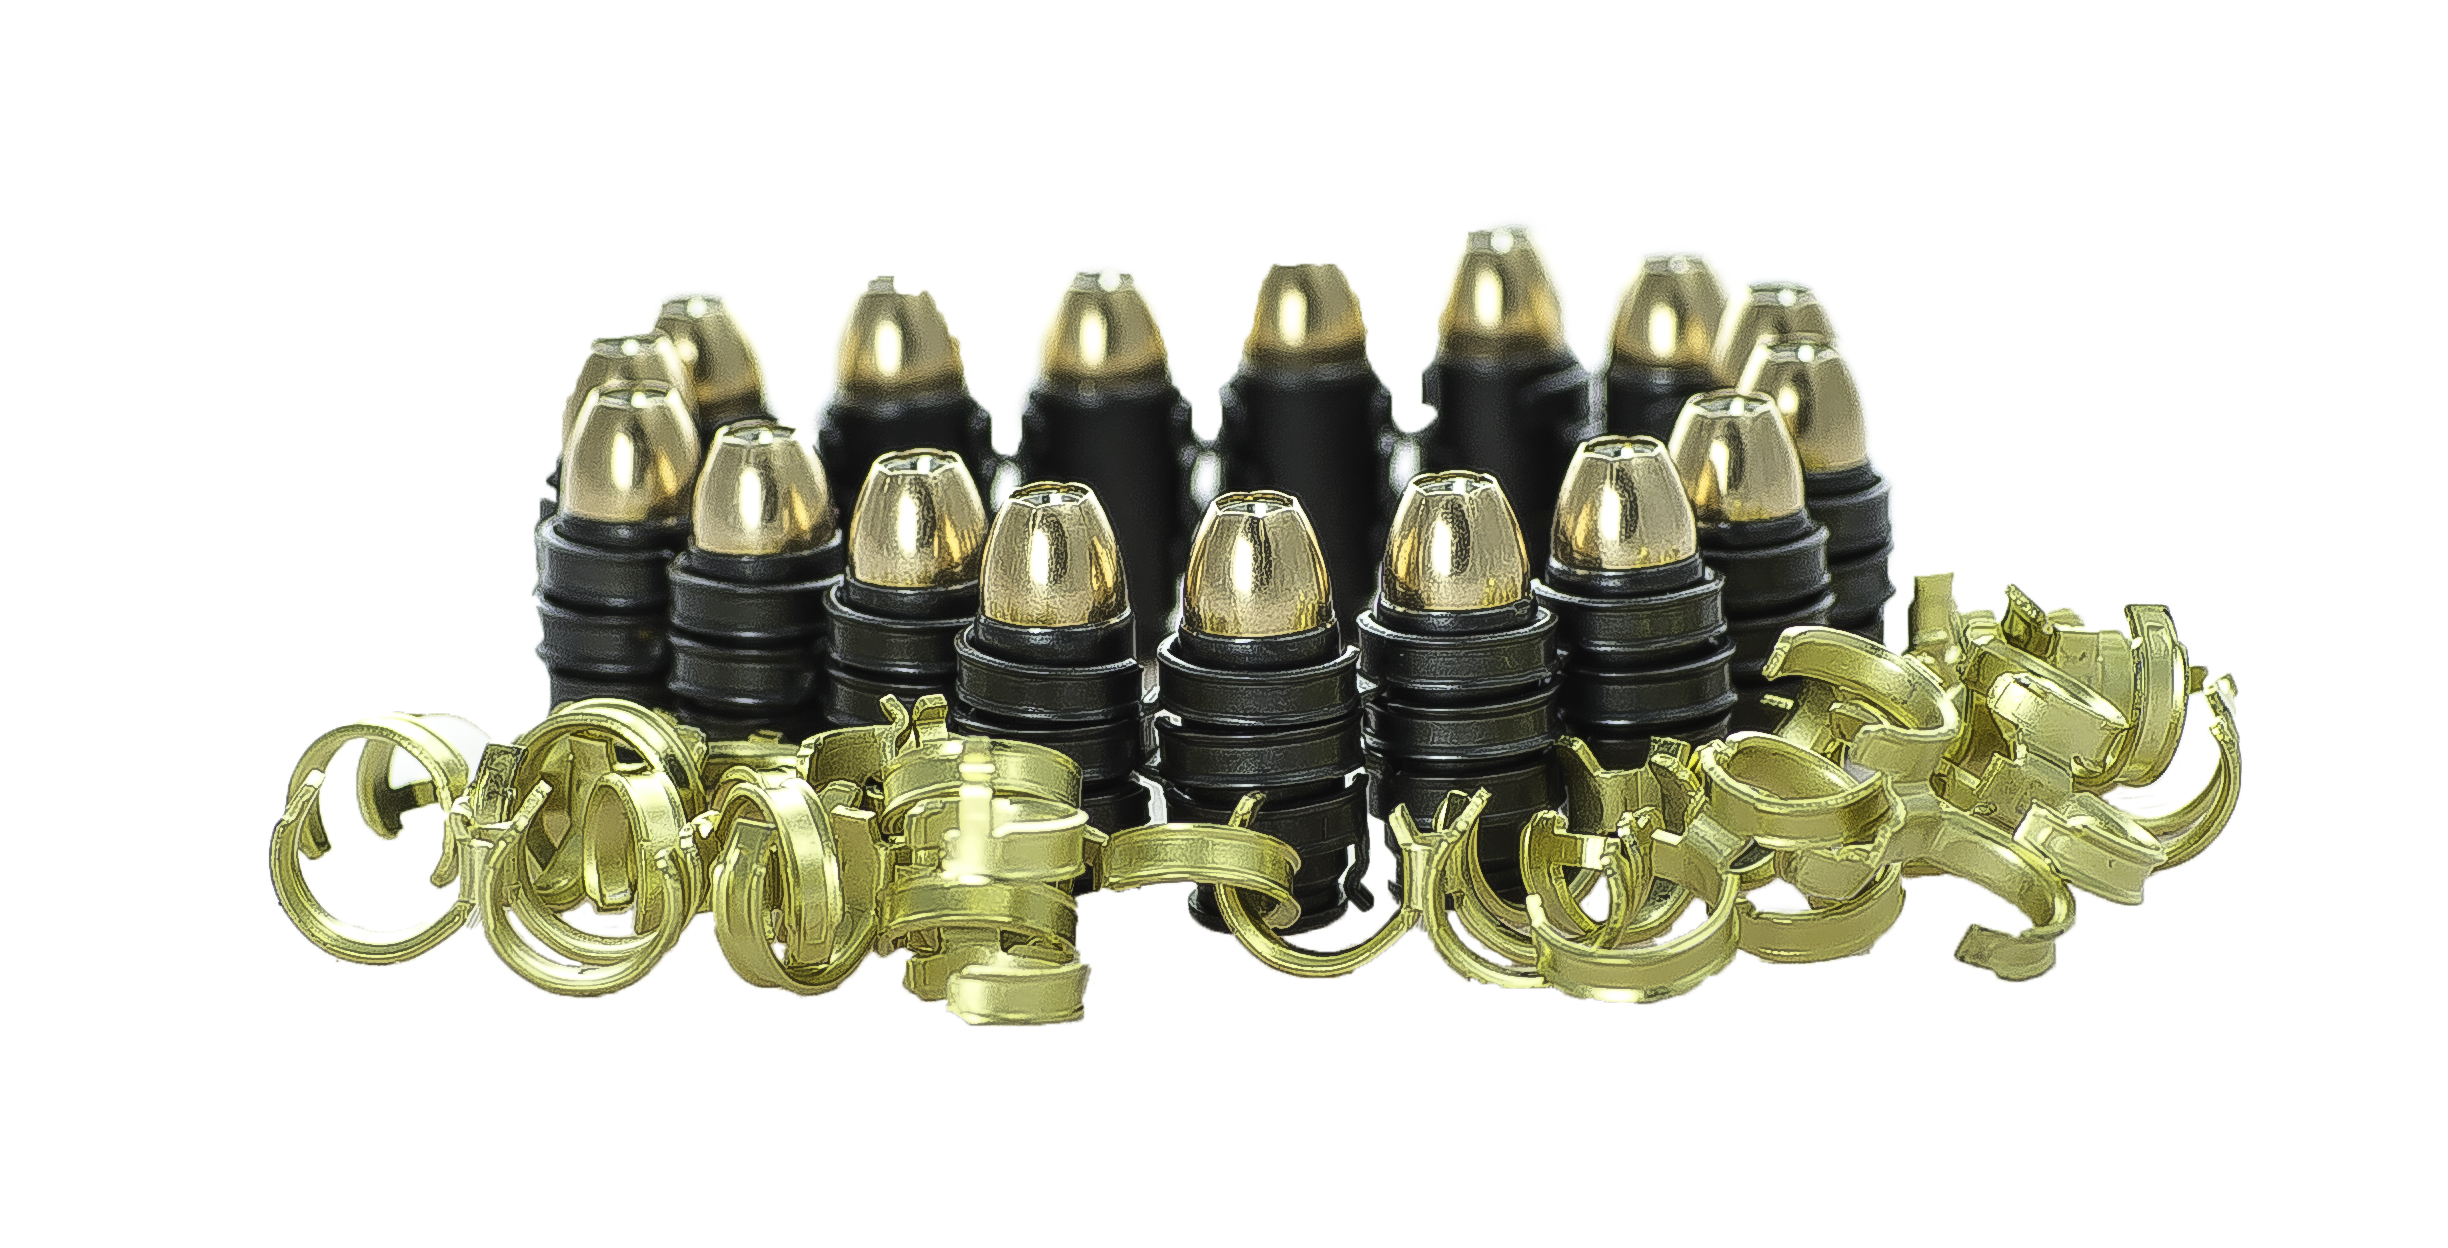 Black on Black 9mm linked bracelet with DRT lead free hollow point projectiles PLUS gold links